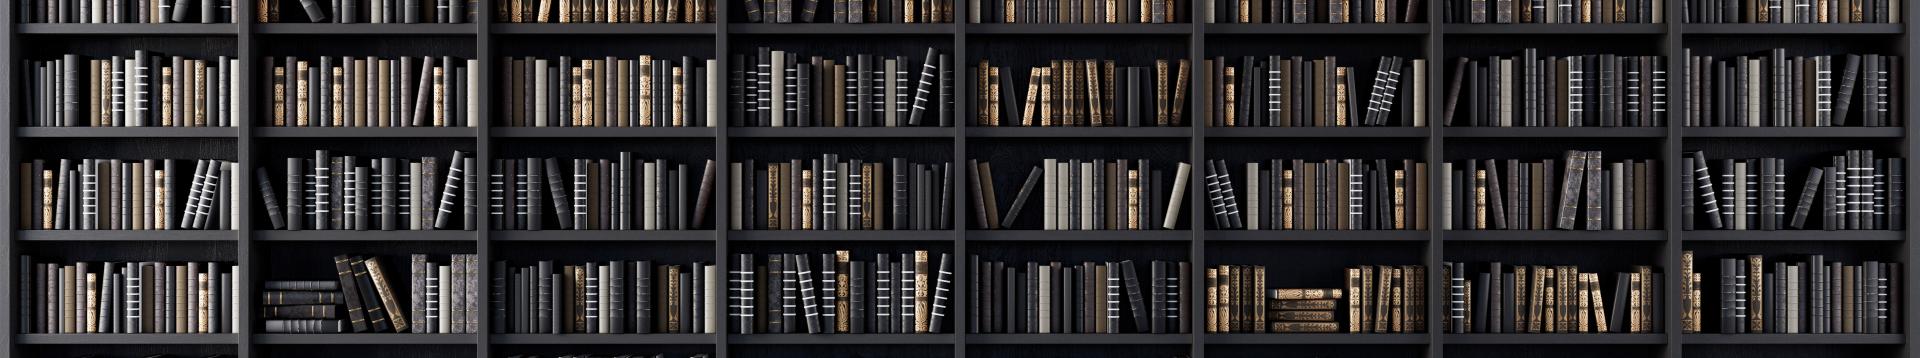 archives, library (iStock)